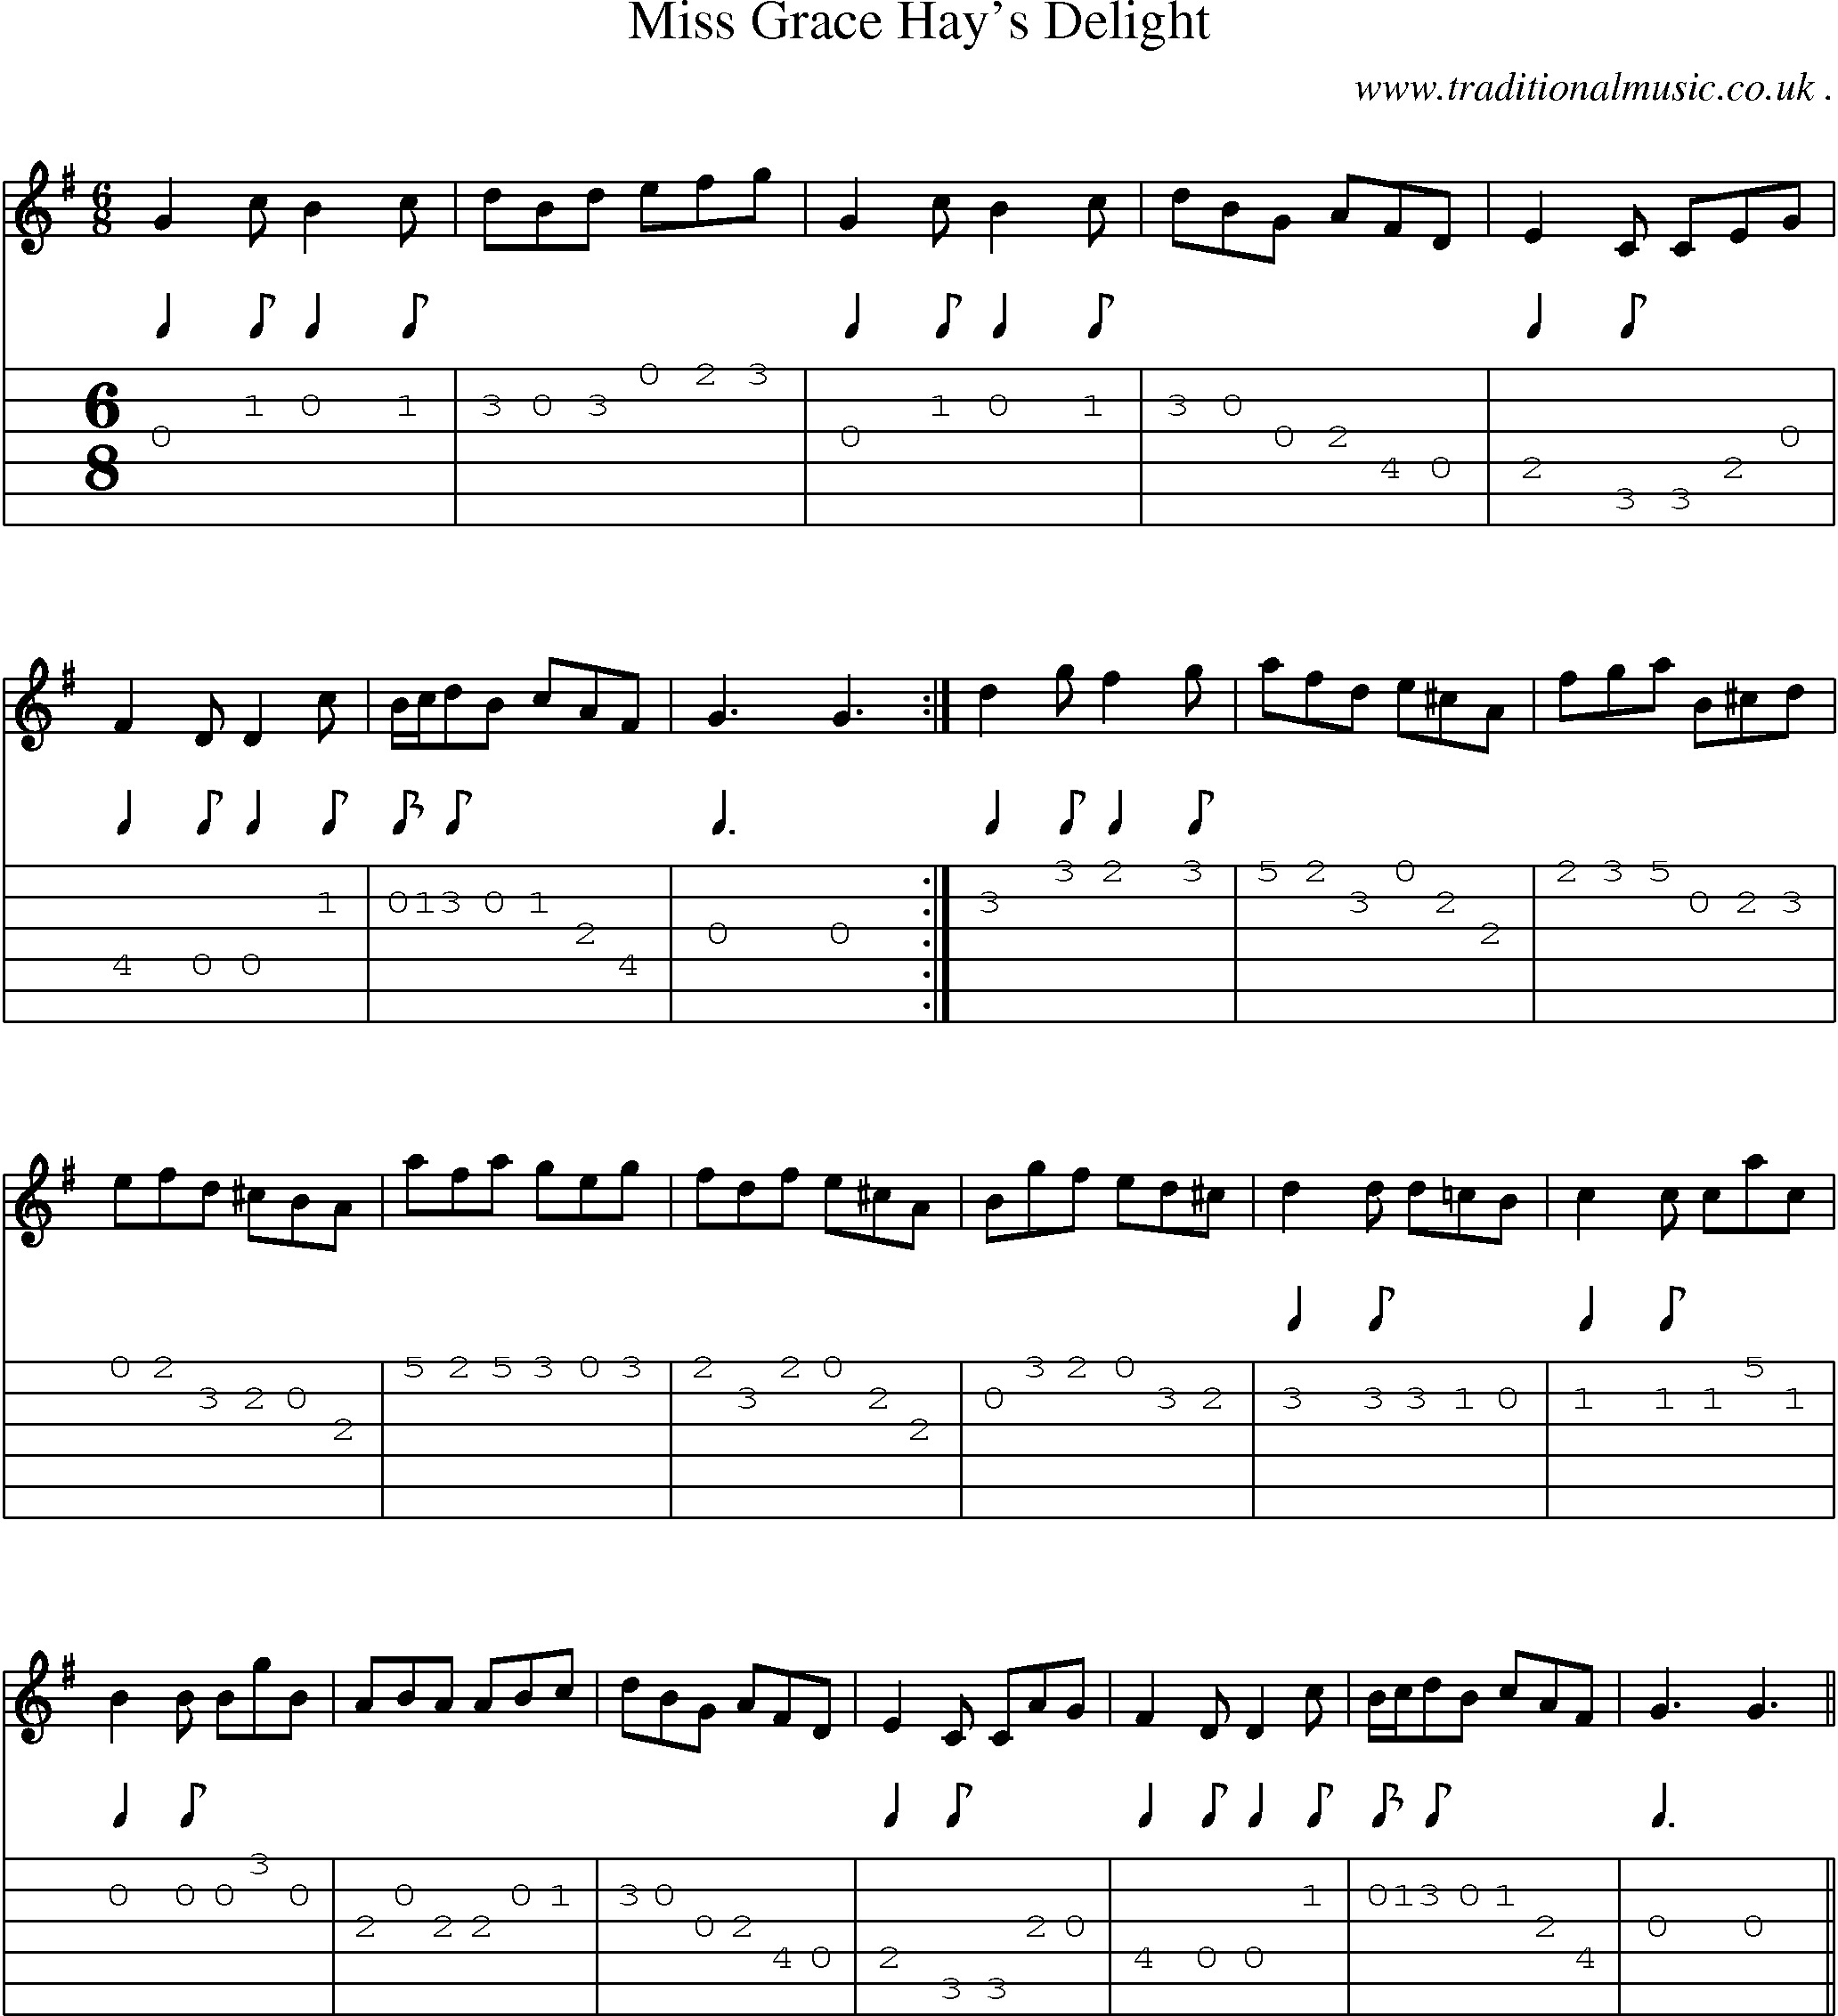 Sheet-Music and Guitar Tabs for Miss Grace Hays Delight